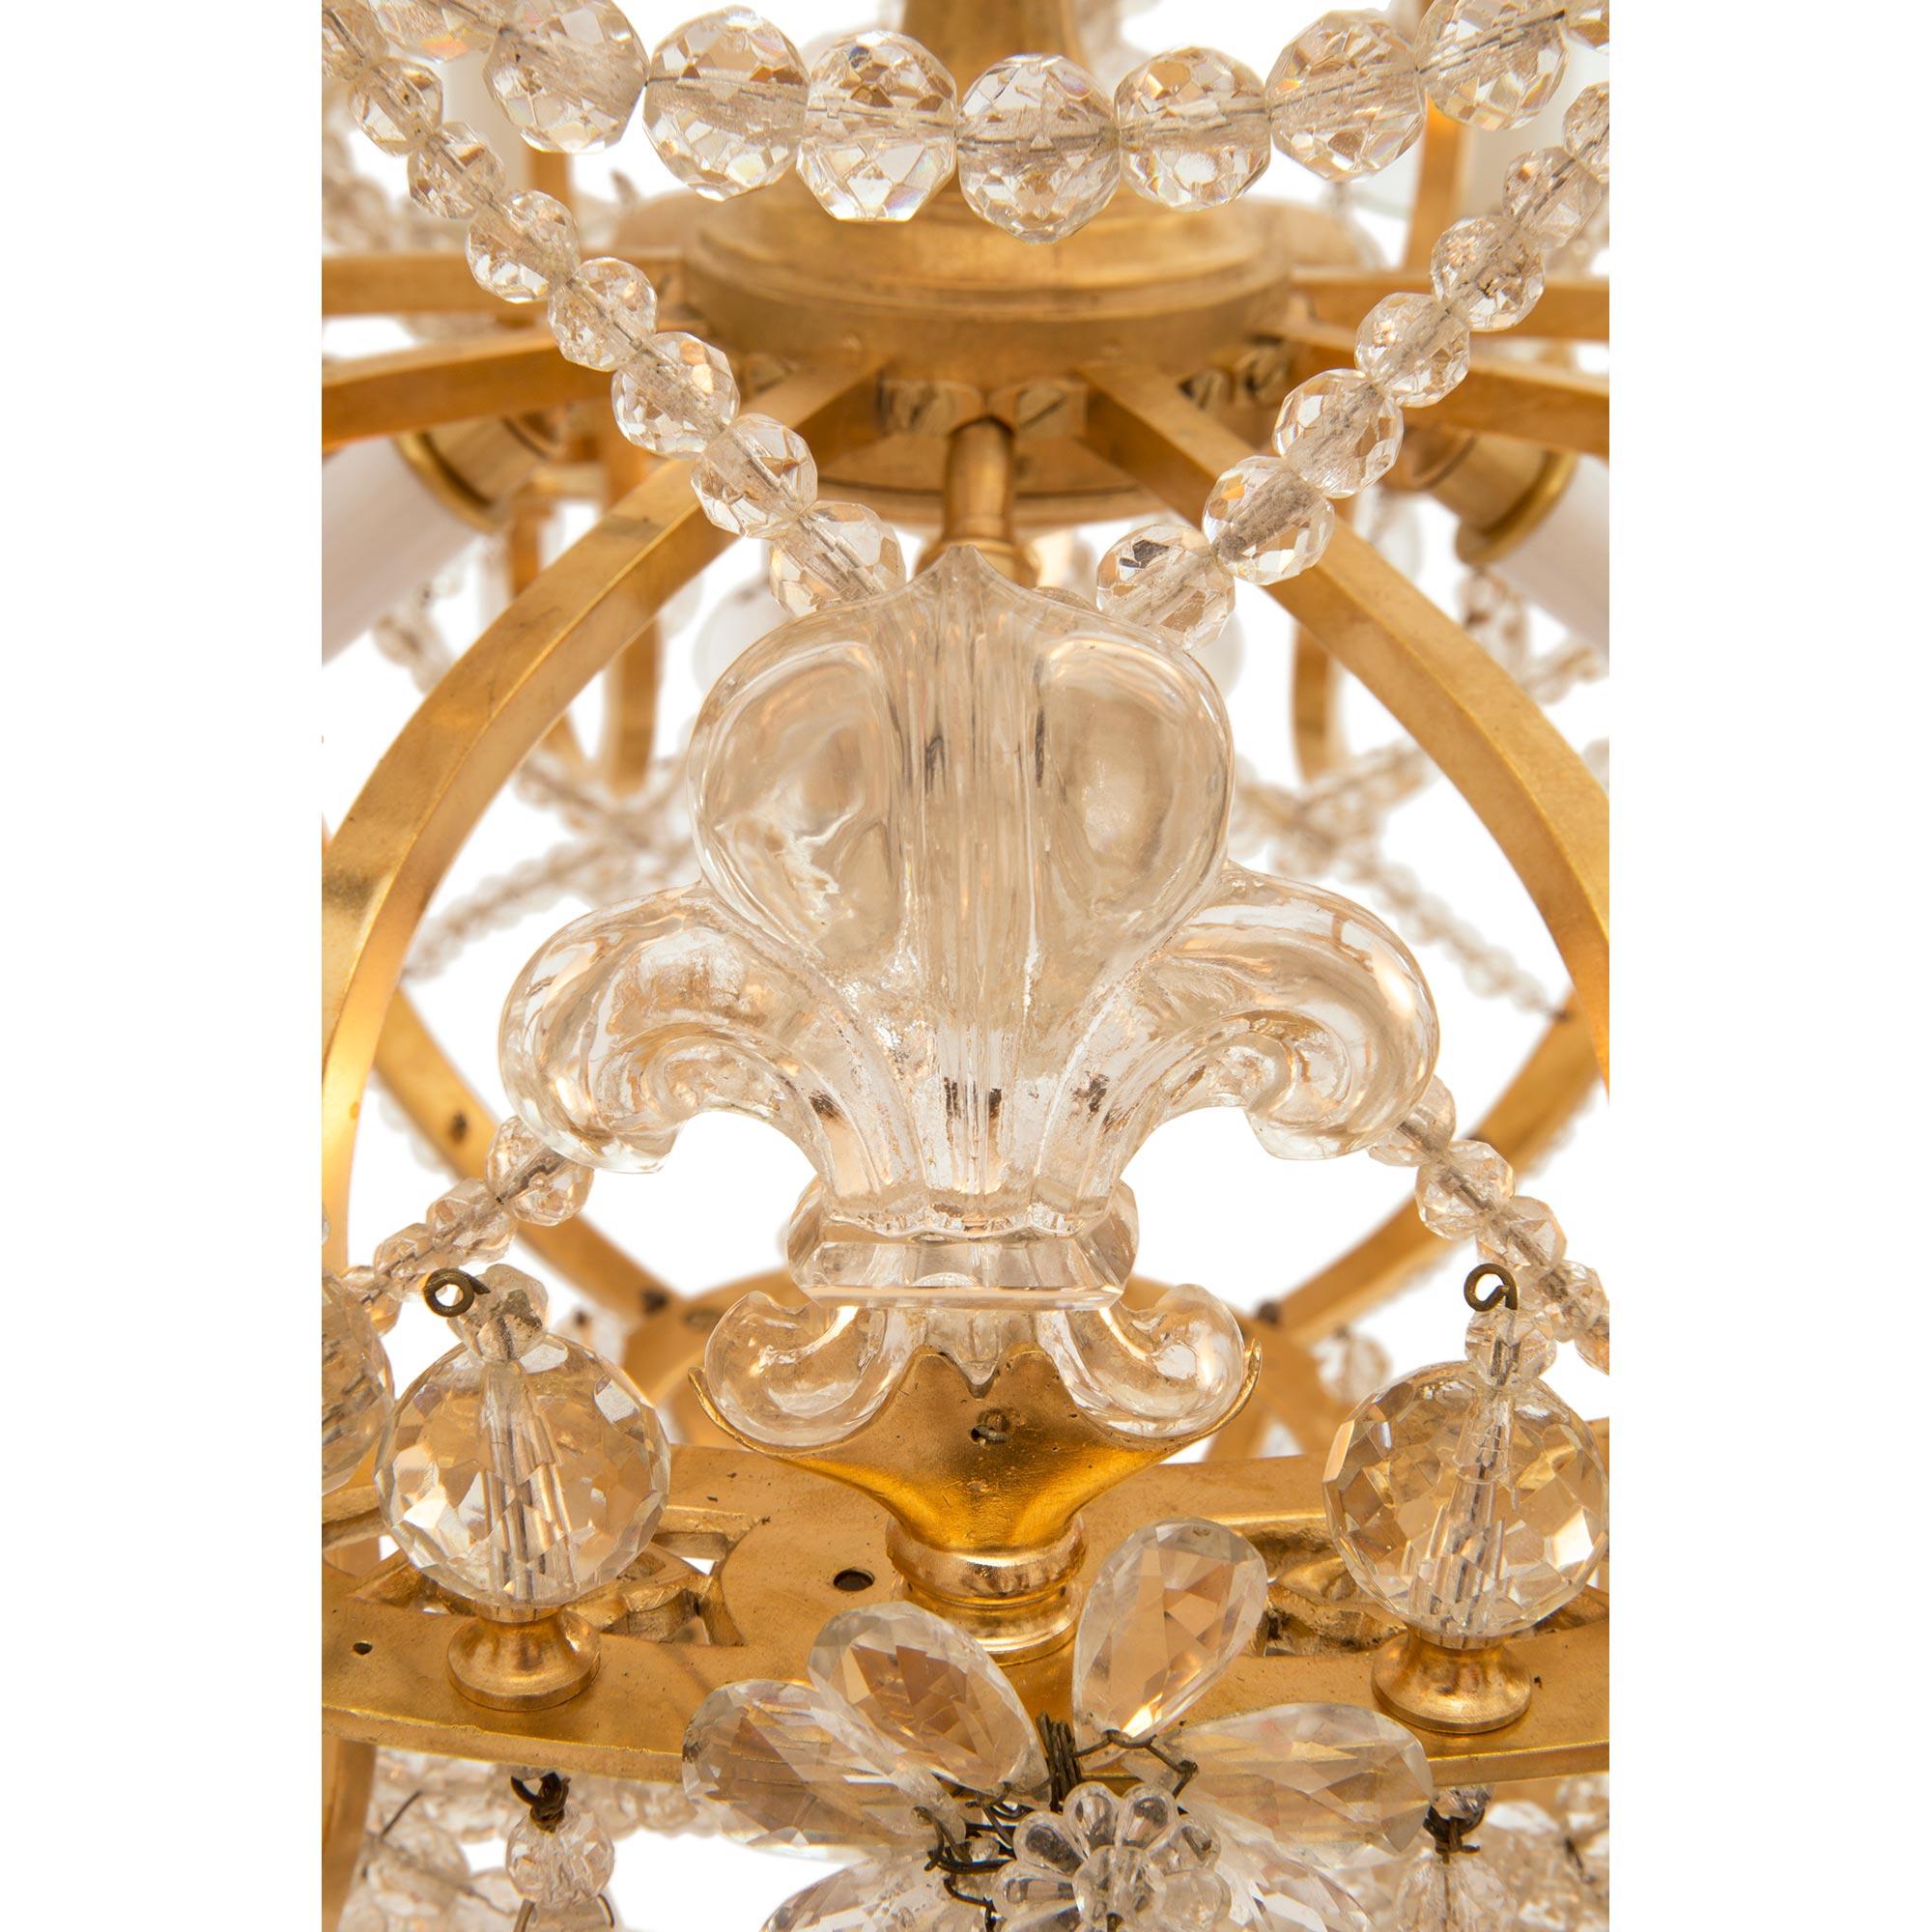 French 19th Century Louis XIV Style Ormolu, Crystal and Glass Royal Chandelier For Sale 4